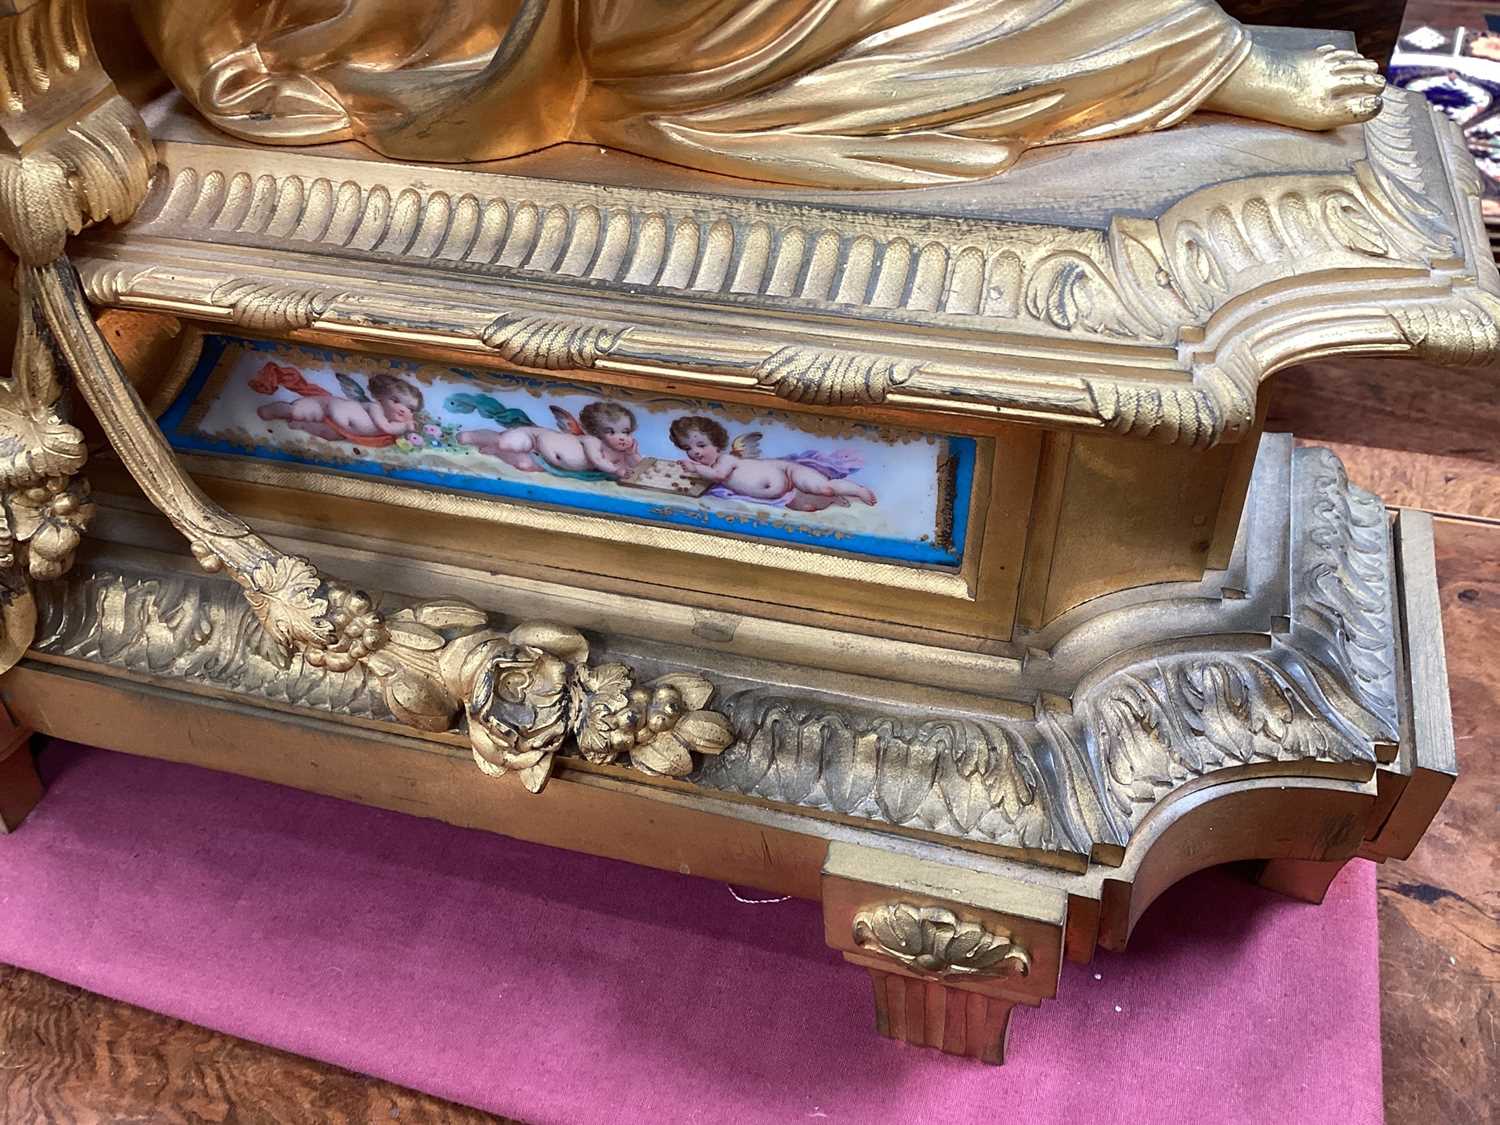 Fine quality large 19th century French ormolu clock garniture by Lerolle à Paris with Sèvres porcela - Image 5 of 26